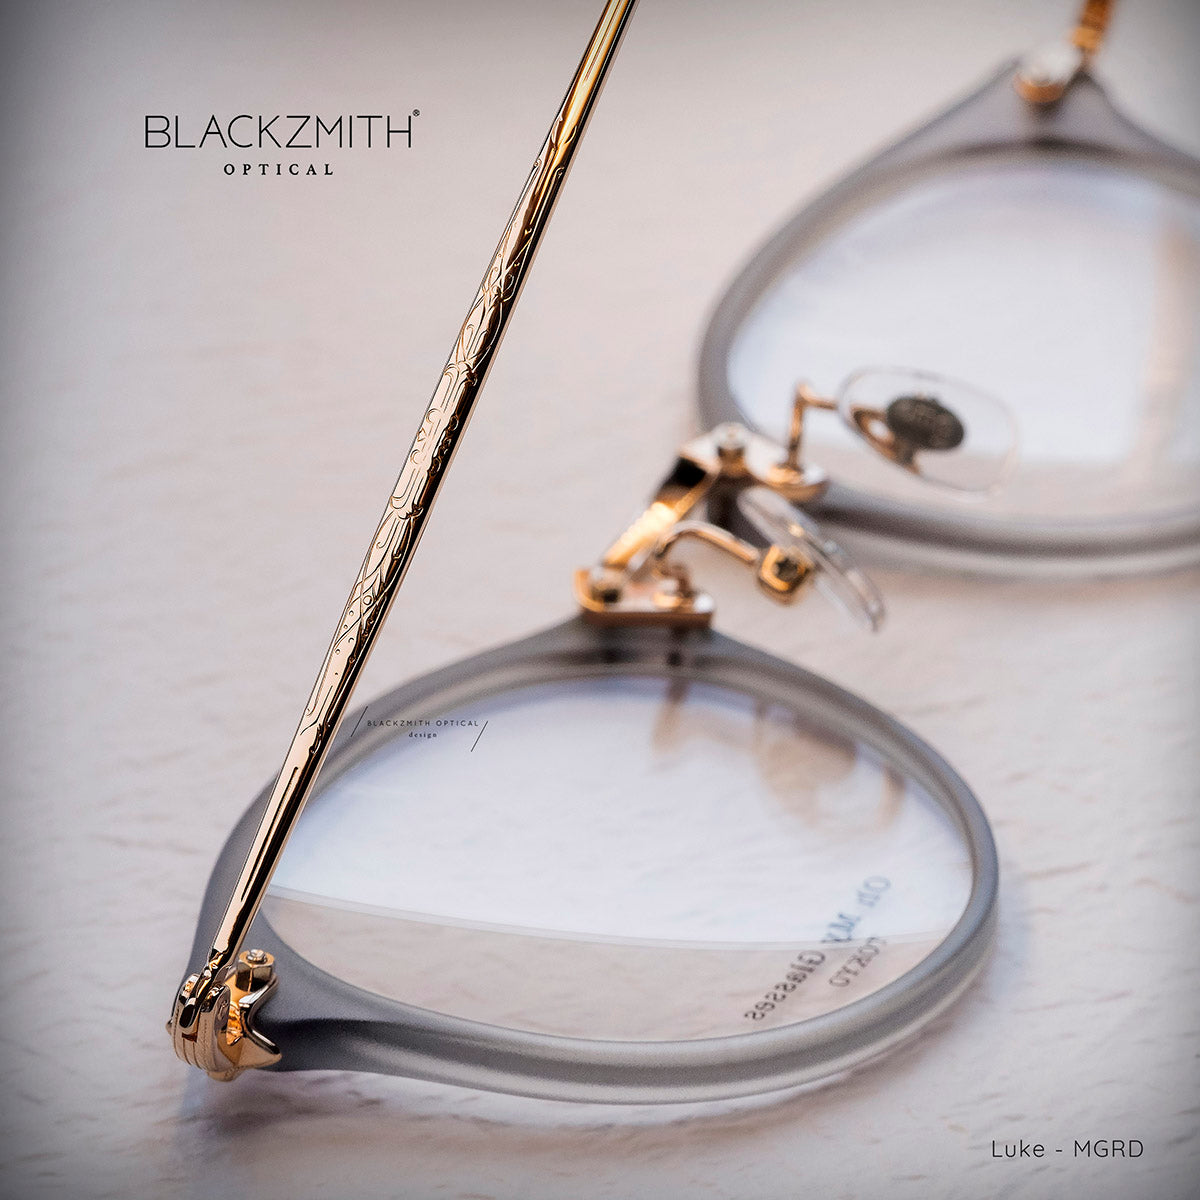 Oh My Glasses - Luke omg-103-MGRD【 Blackzmith Exclusive Limited Edition】